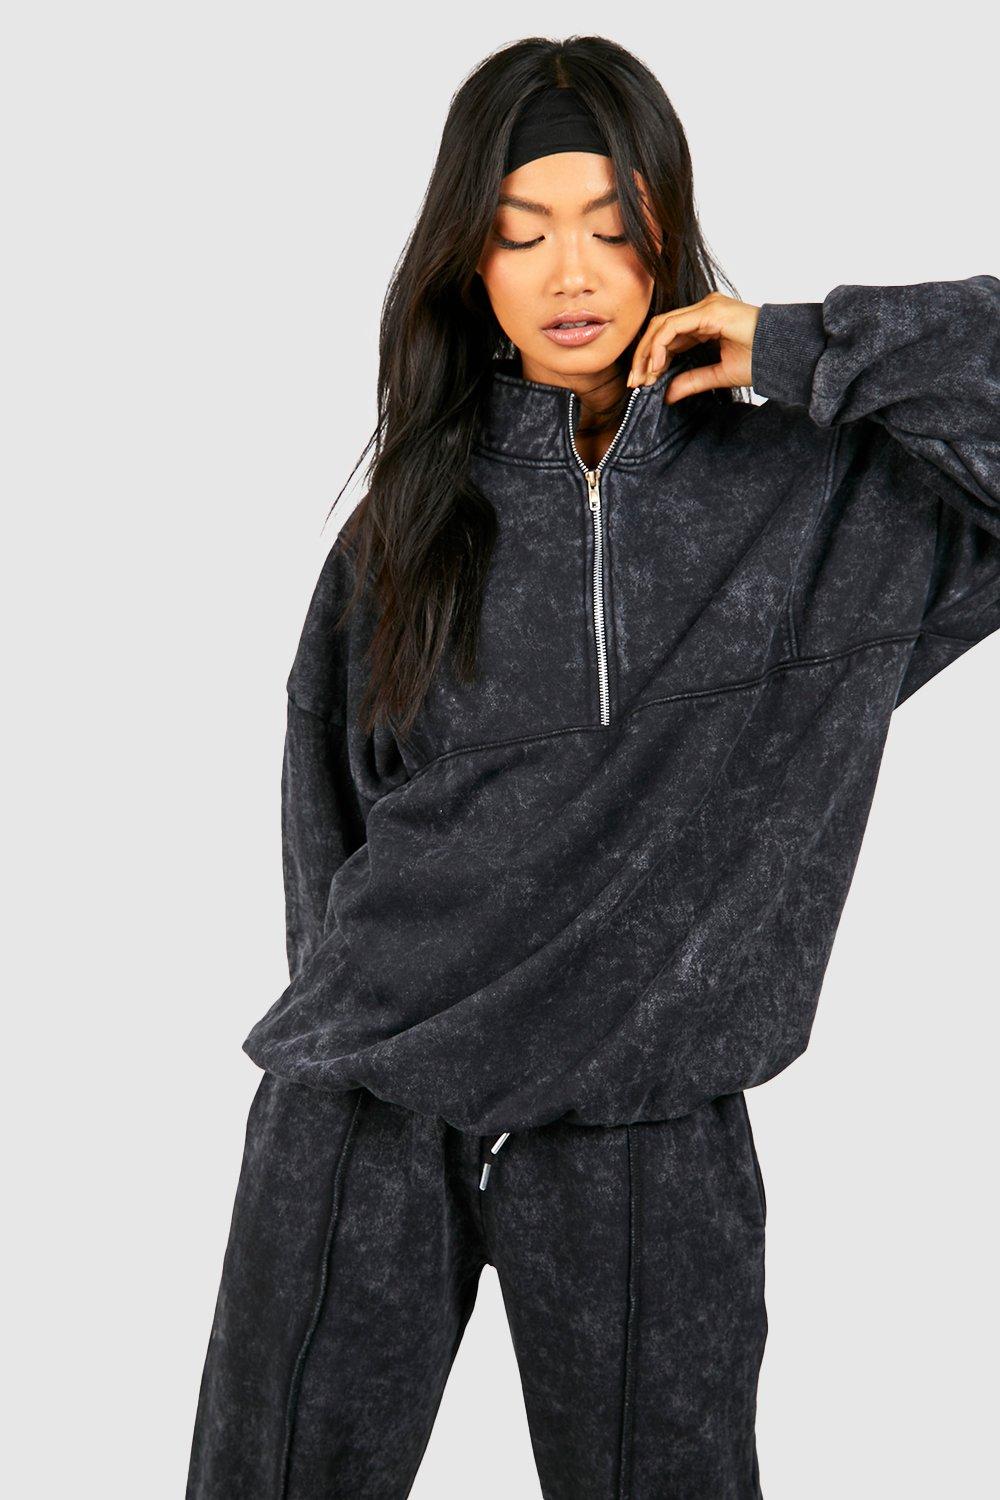 Charcoal Washed Oversized Hoodie, Tops